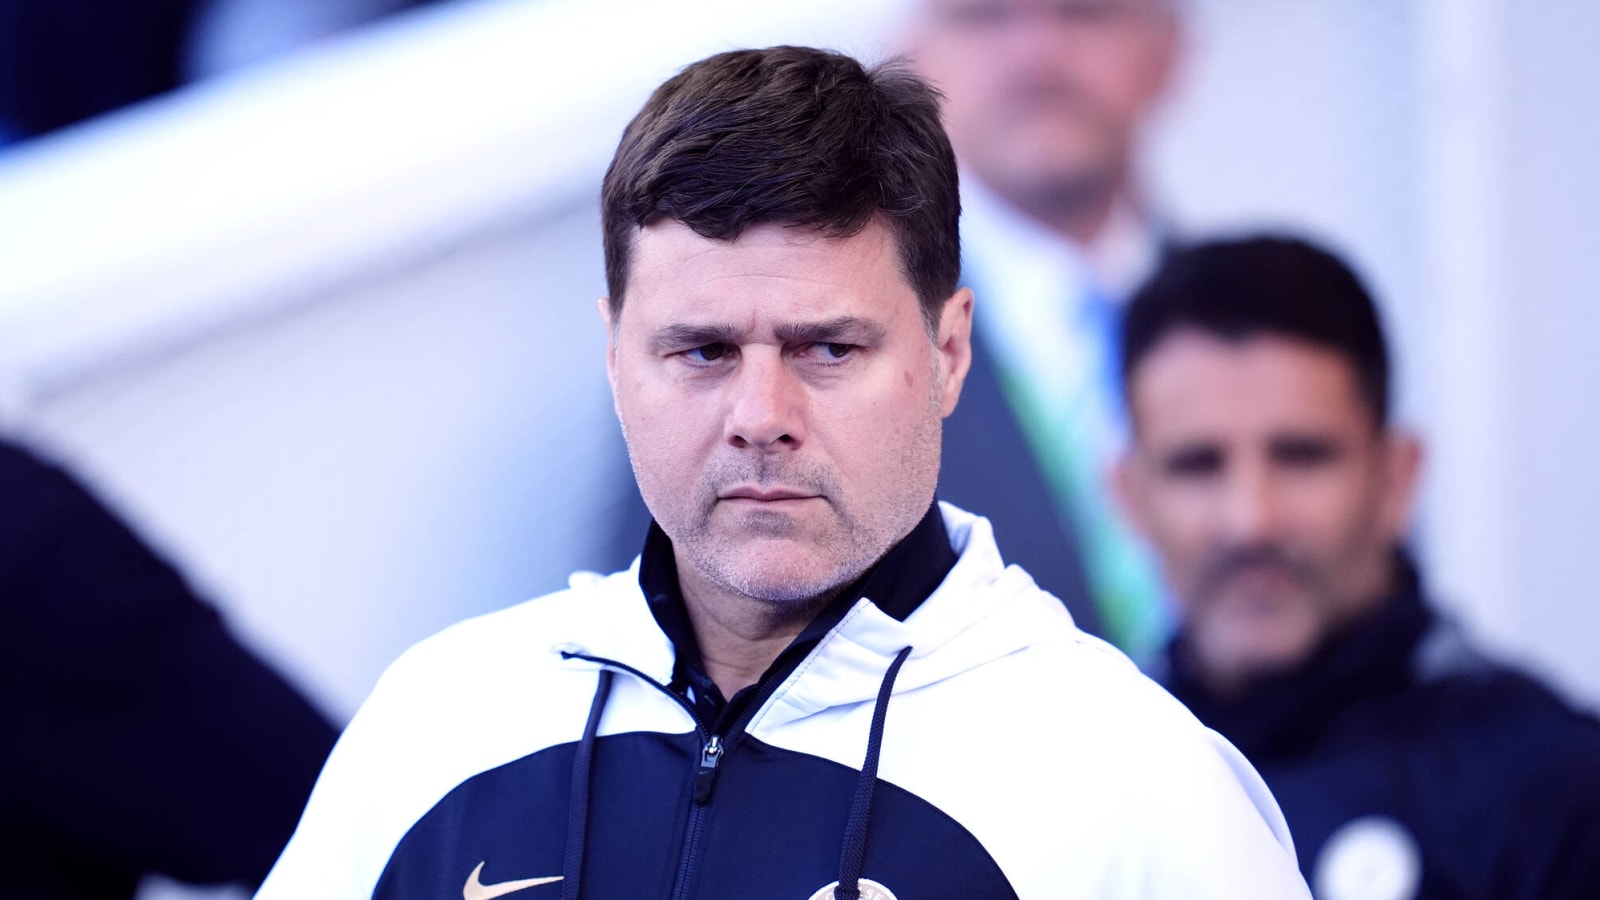 ‘Bigger voice’ – Mauricio Pochettino will outline demands in Chelsea review meeting